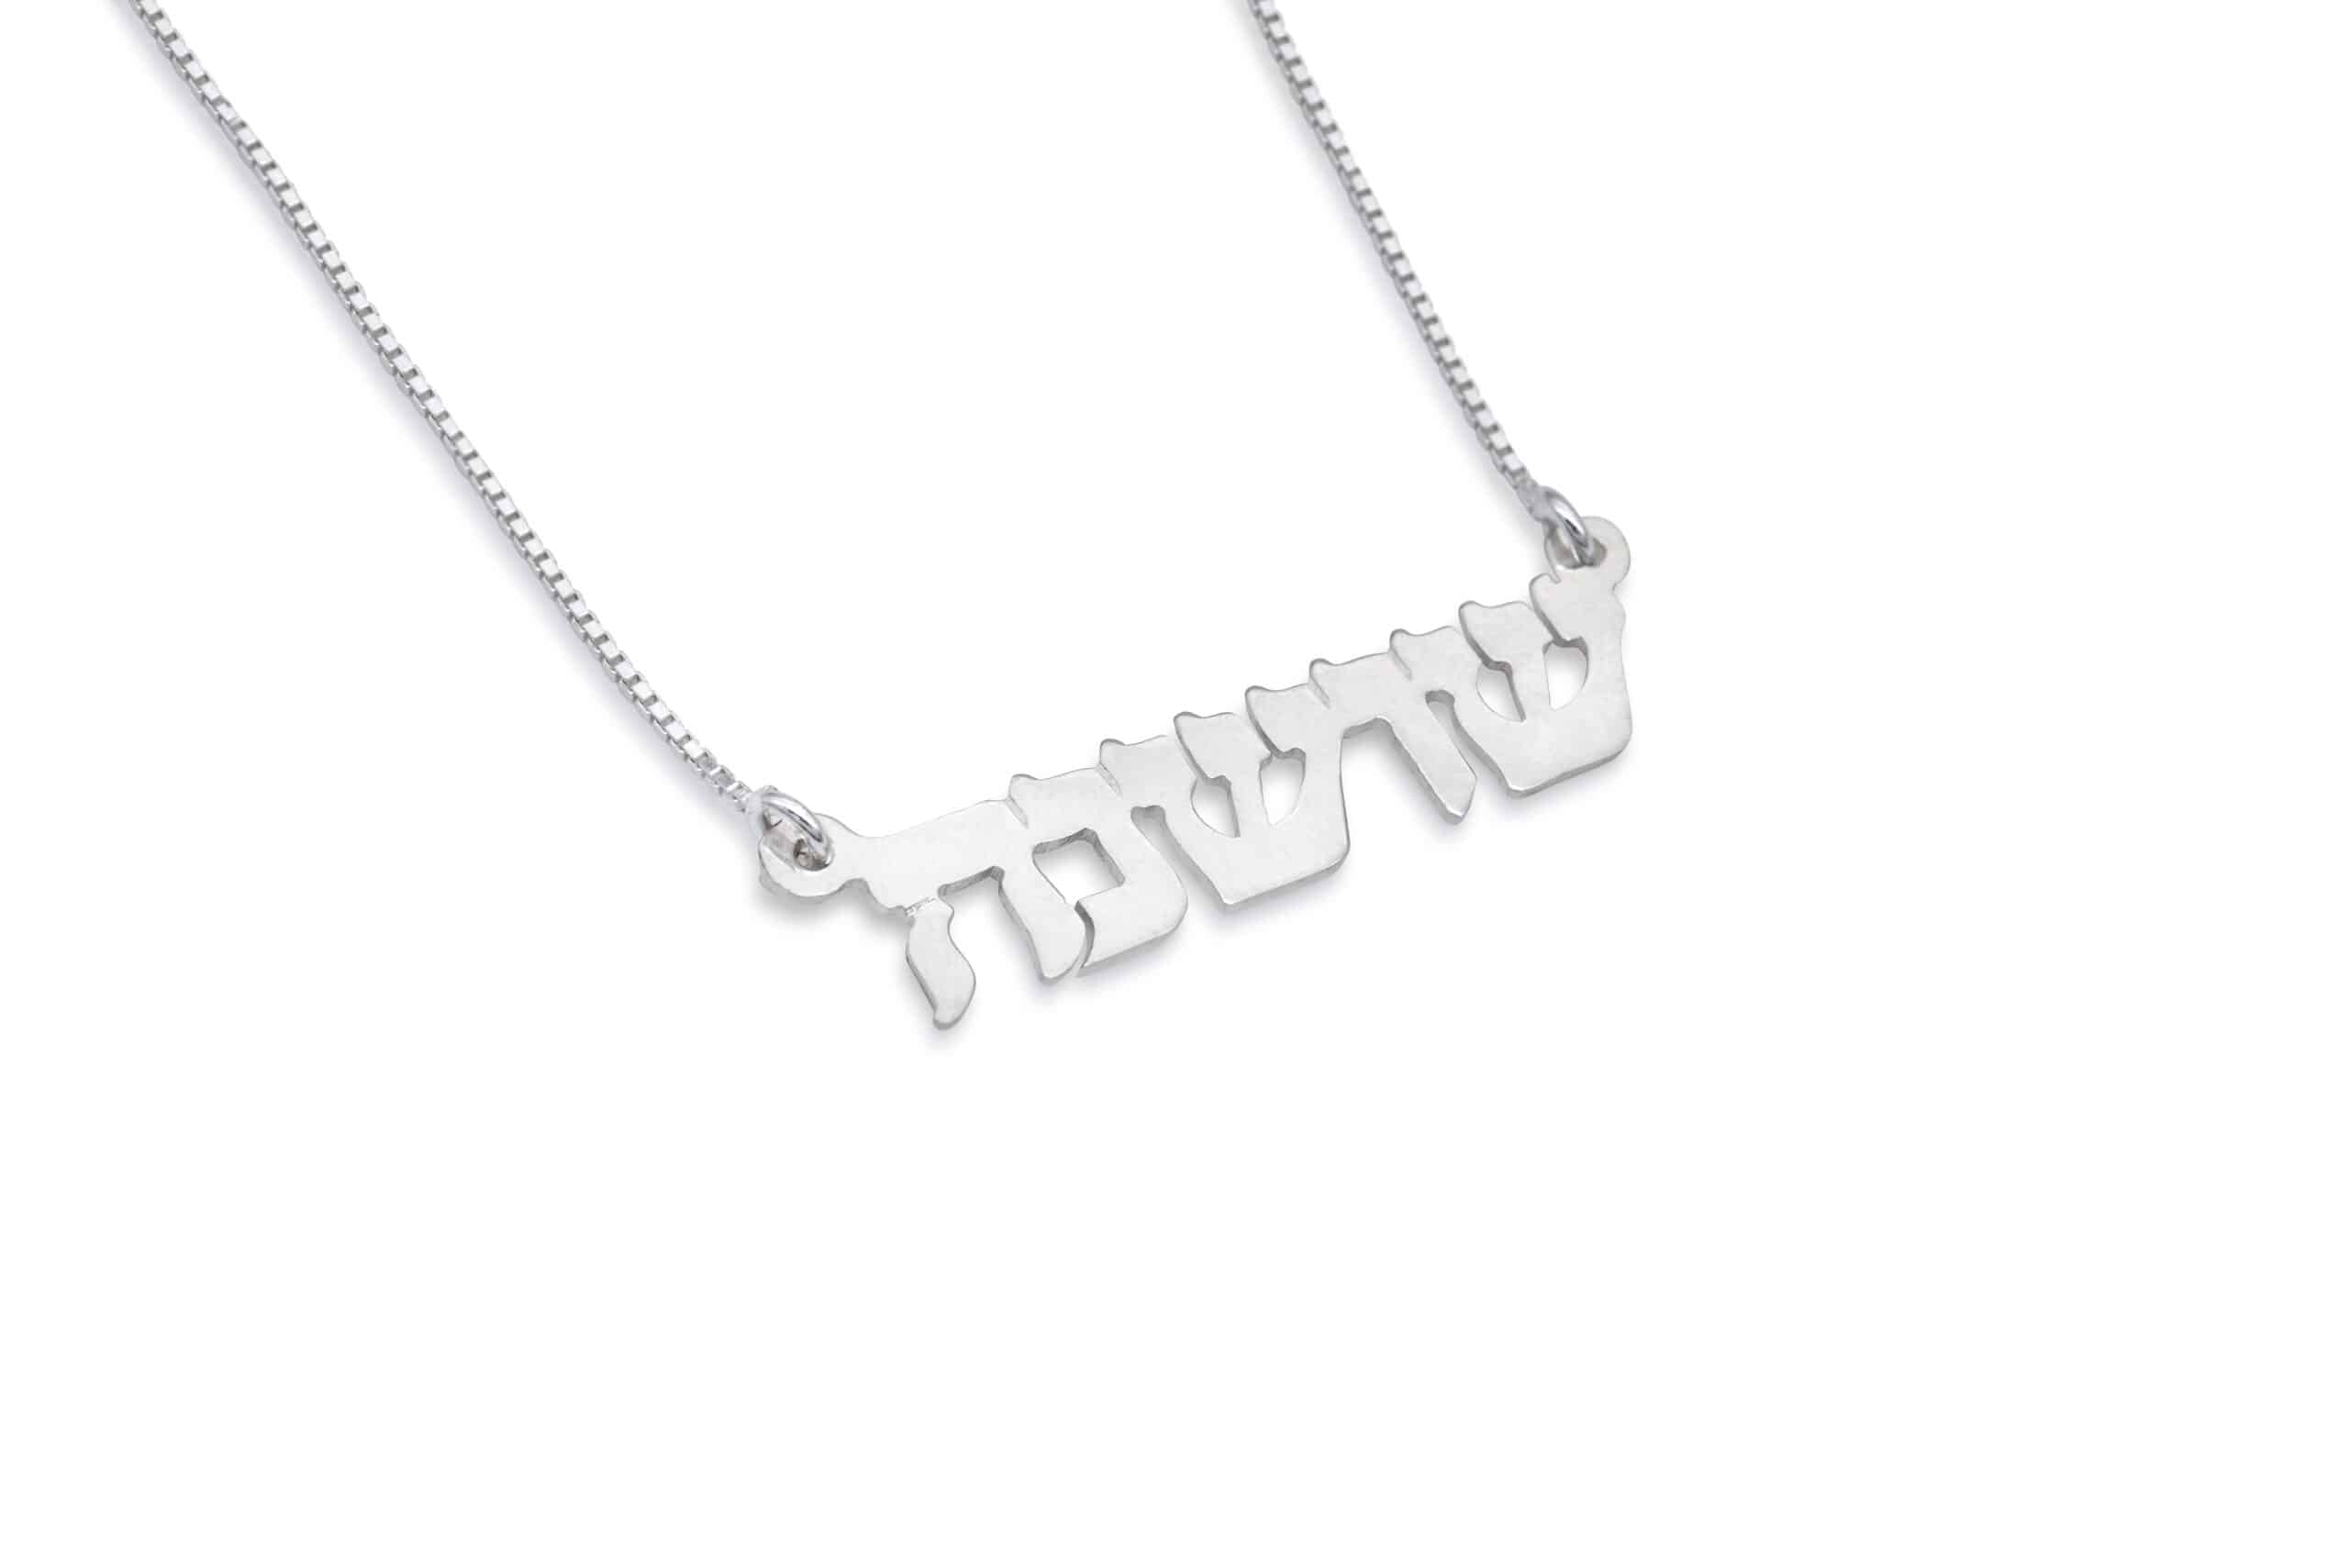 Stylish Sterling Silver Personalized Necklace